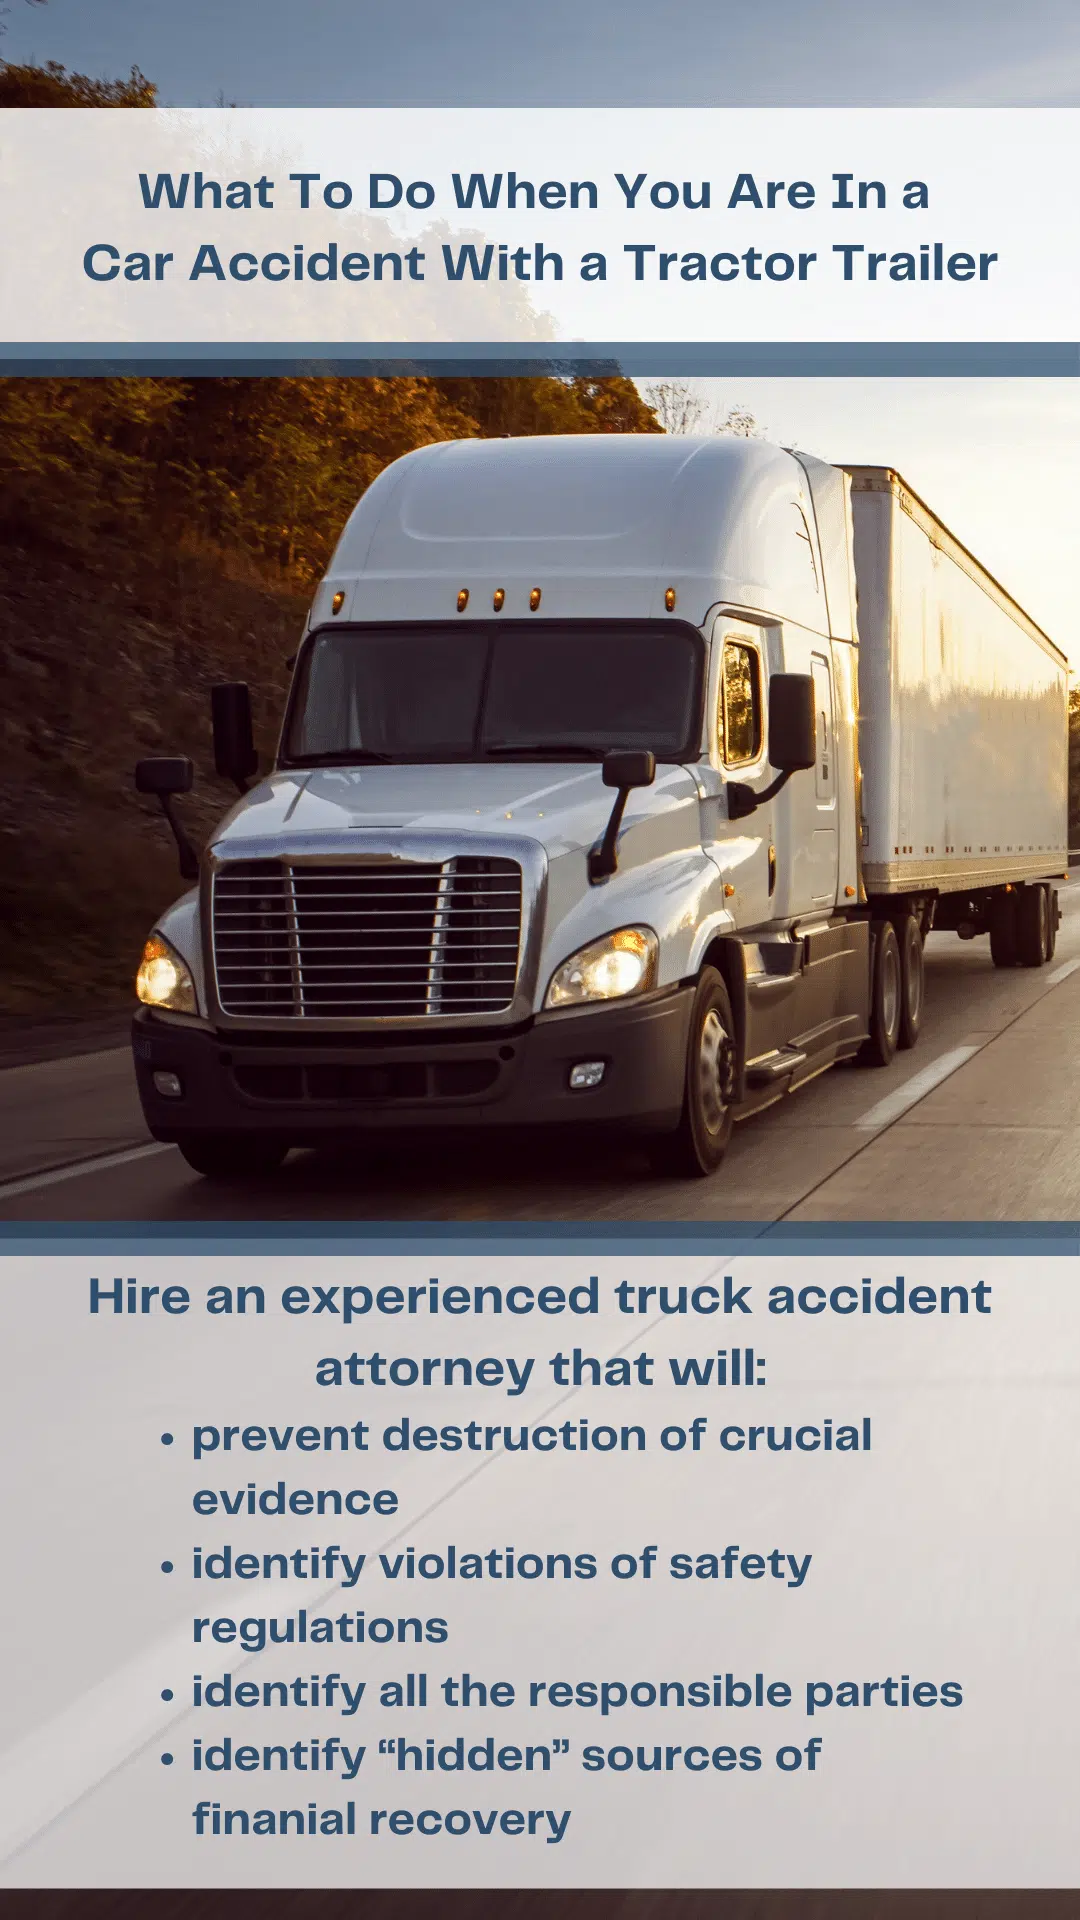 Car Accident With Tractor Trailer In Michigan: Here’s What To Do